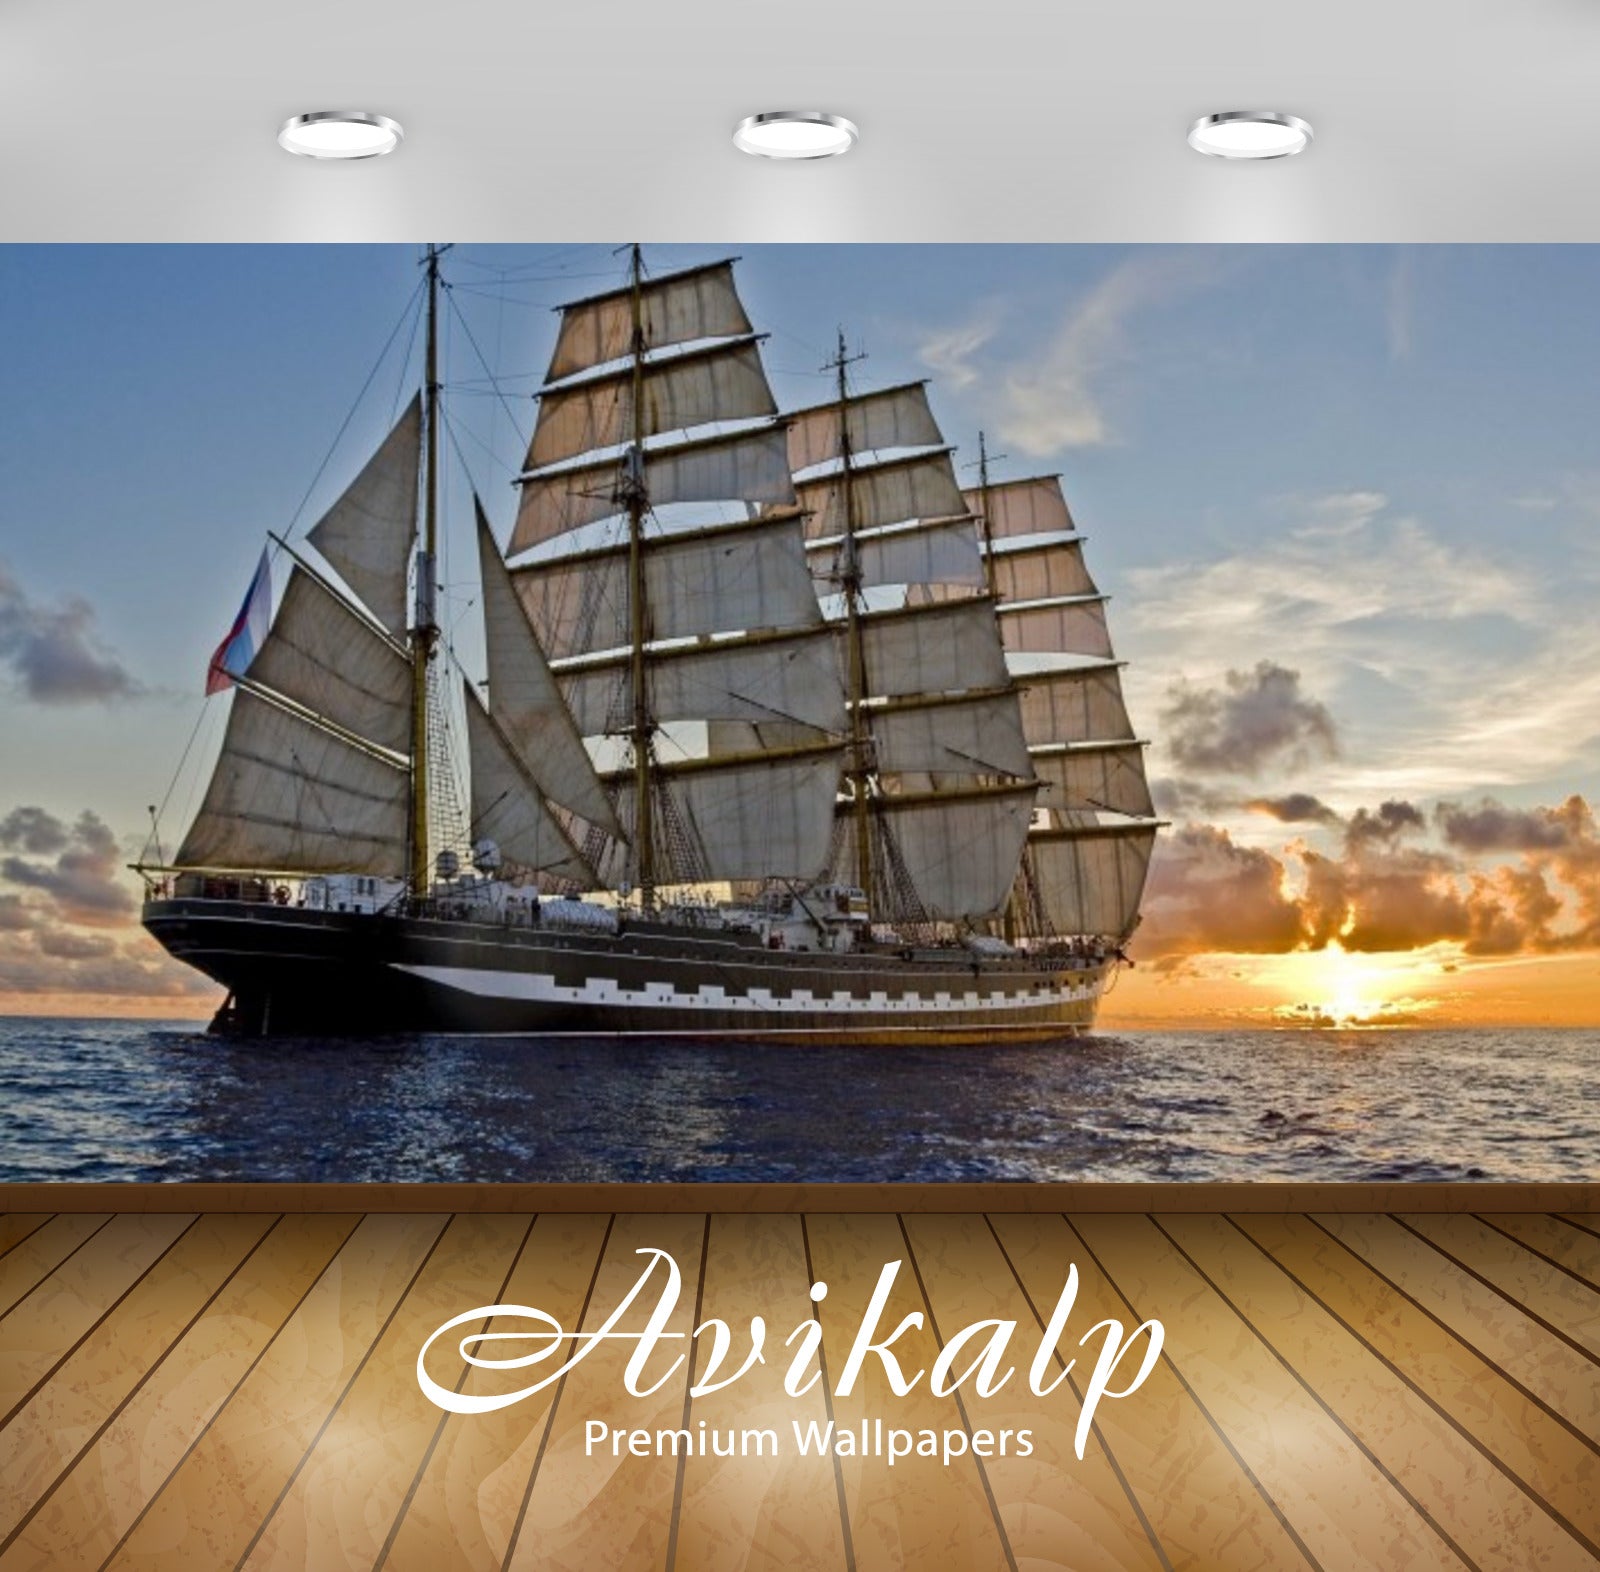 Avikalp Exclusive Awi2887 Old Wooden Sailing Ships Full HD Wallpapers for Living room, Hall, Kids Ro